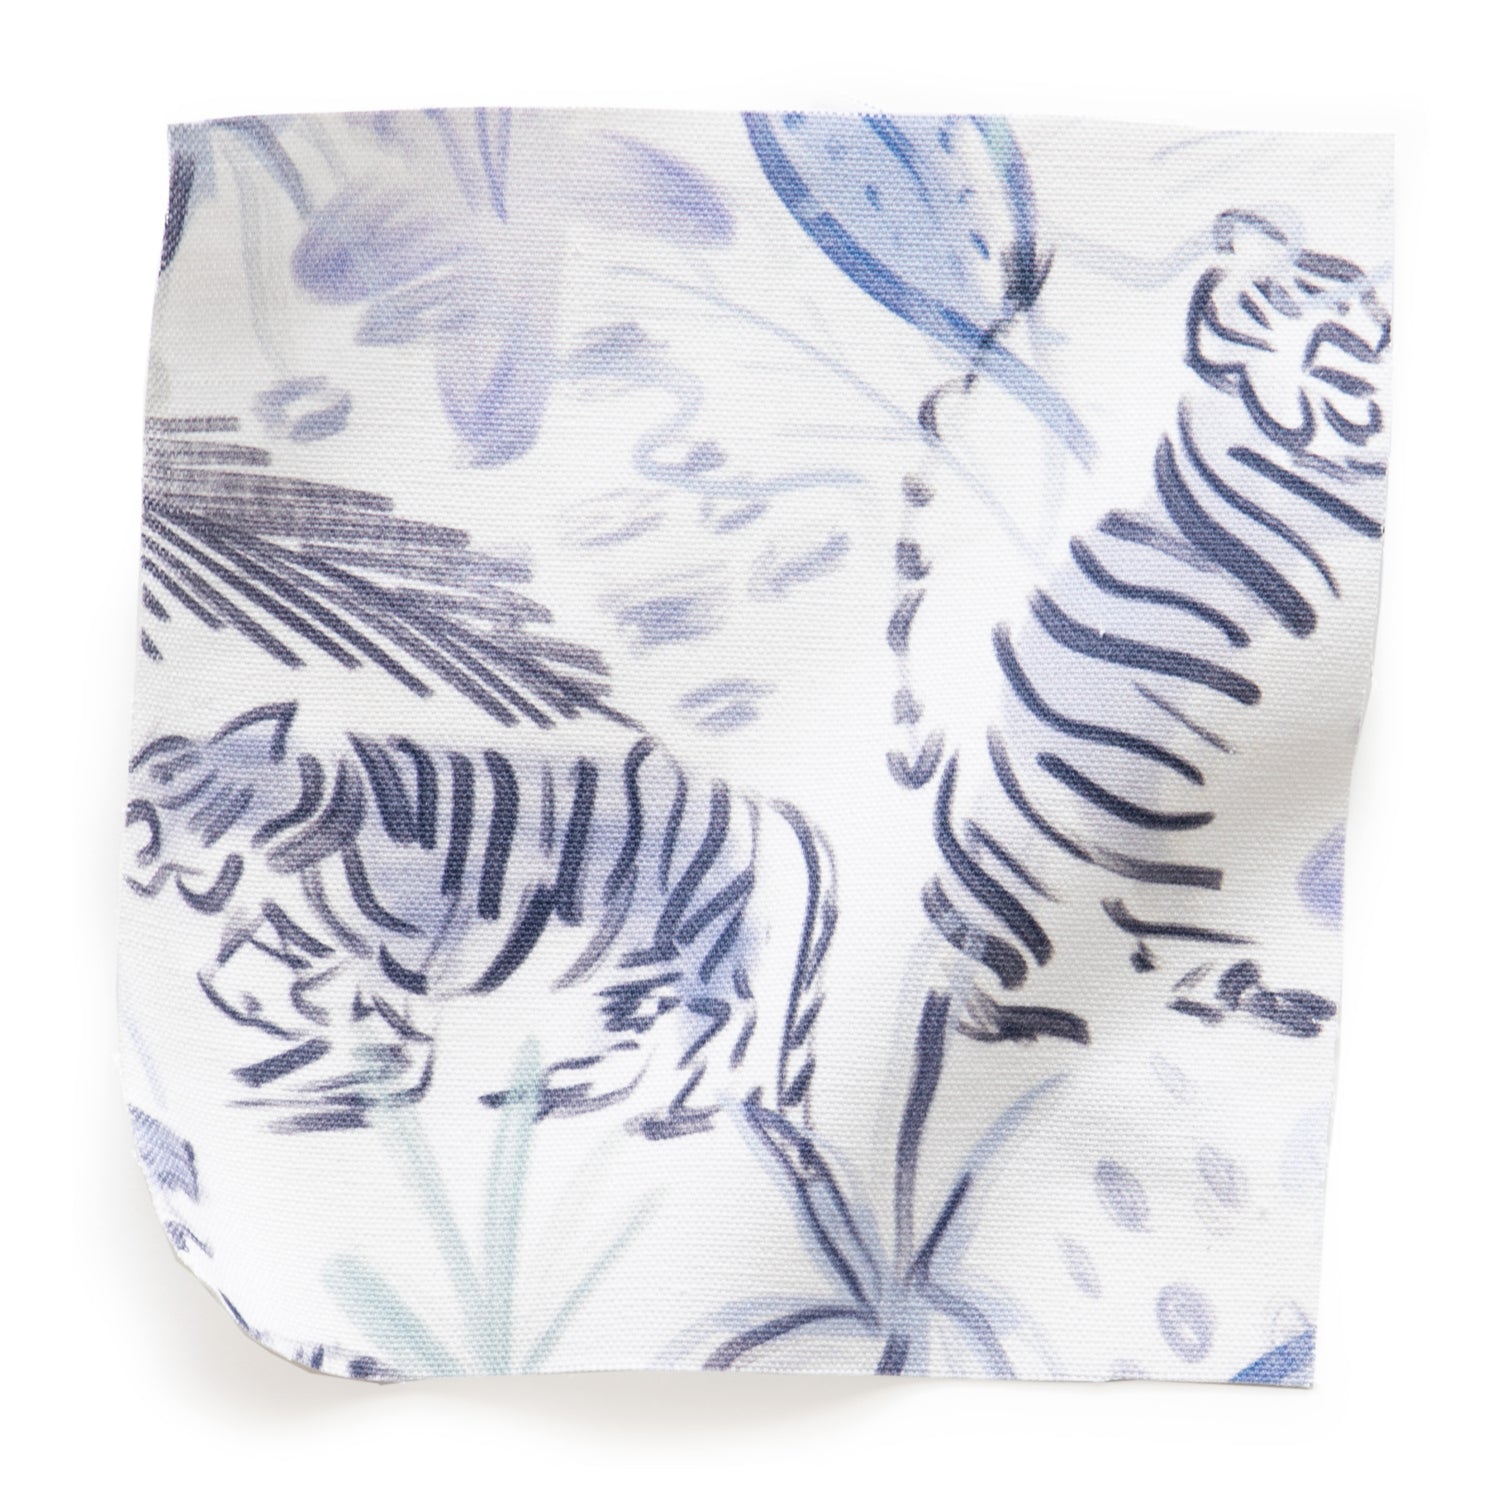 Blue With Intricate Tiger Design Printed Cotton Swatch